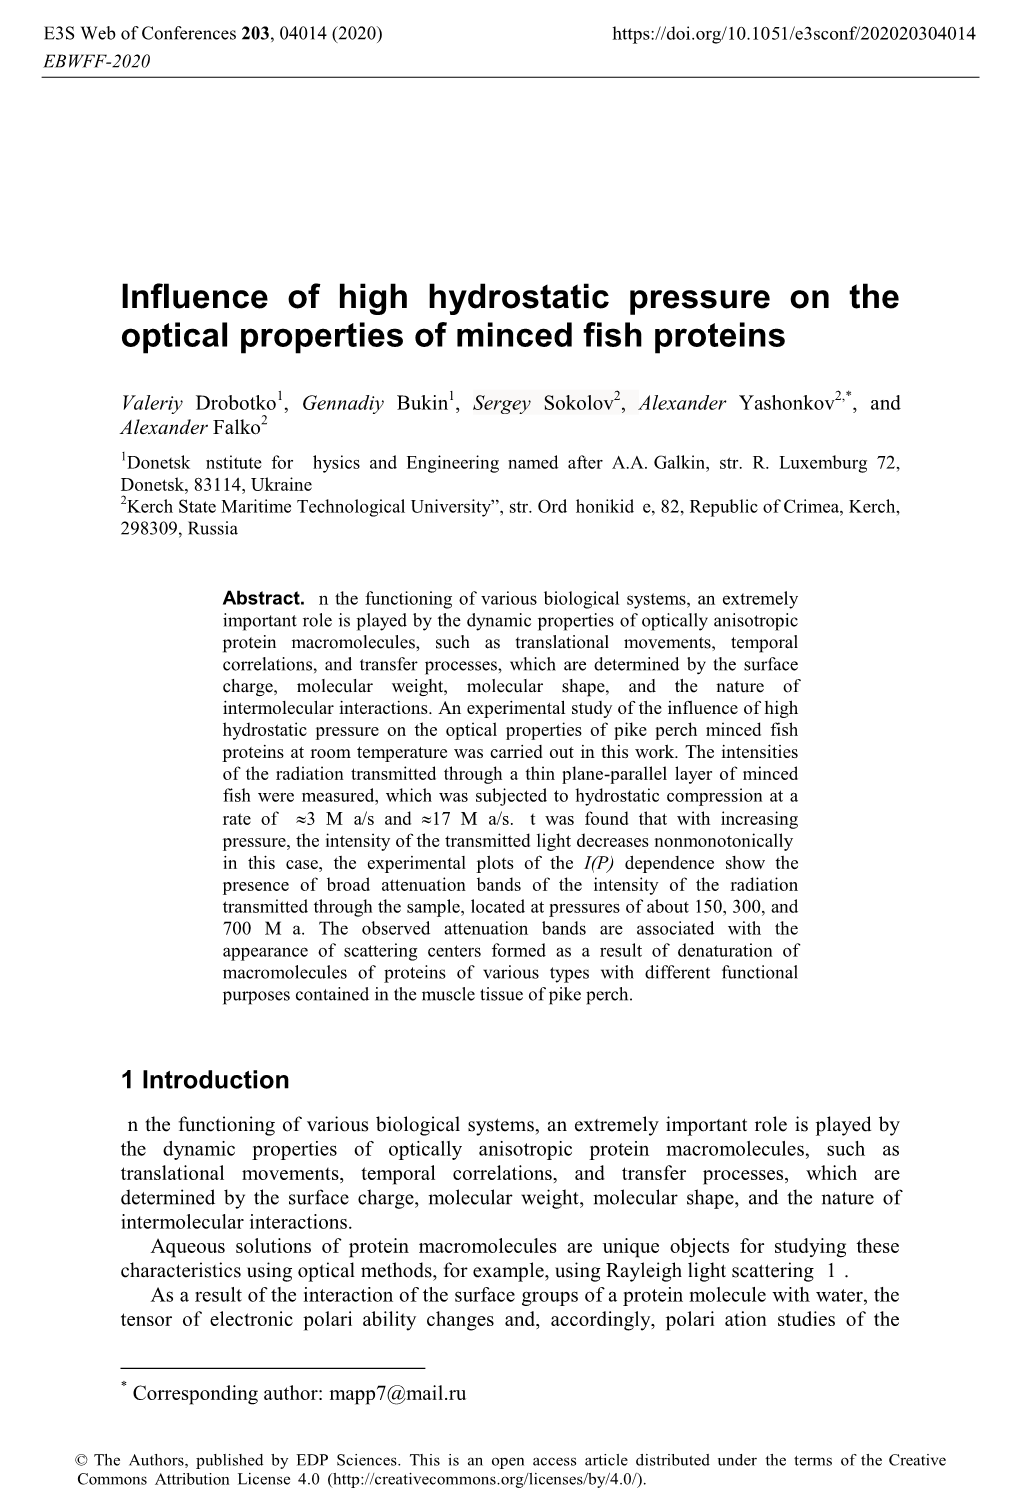 Influence of High Hydrostatic Pressure on the Optical Properties of Minced Fish Proteins